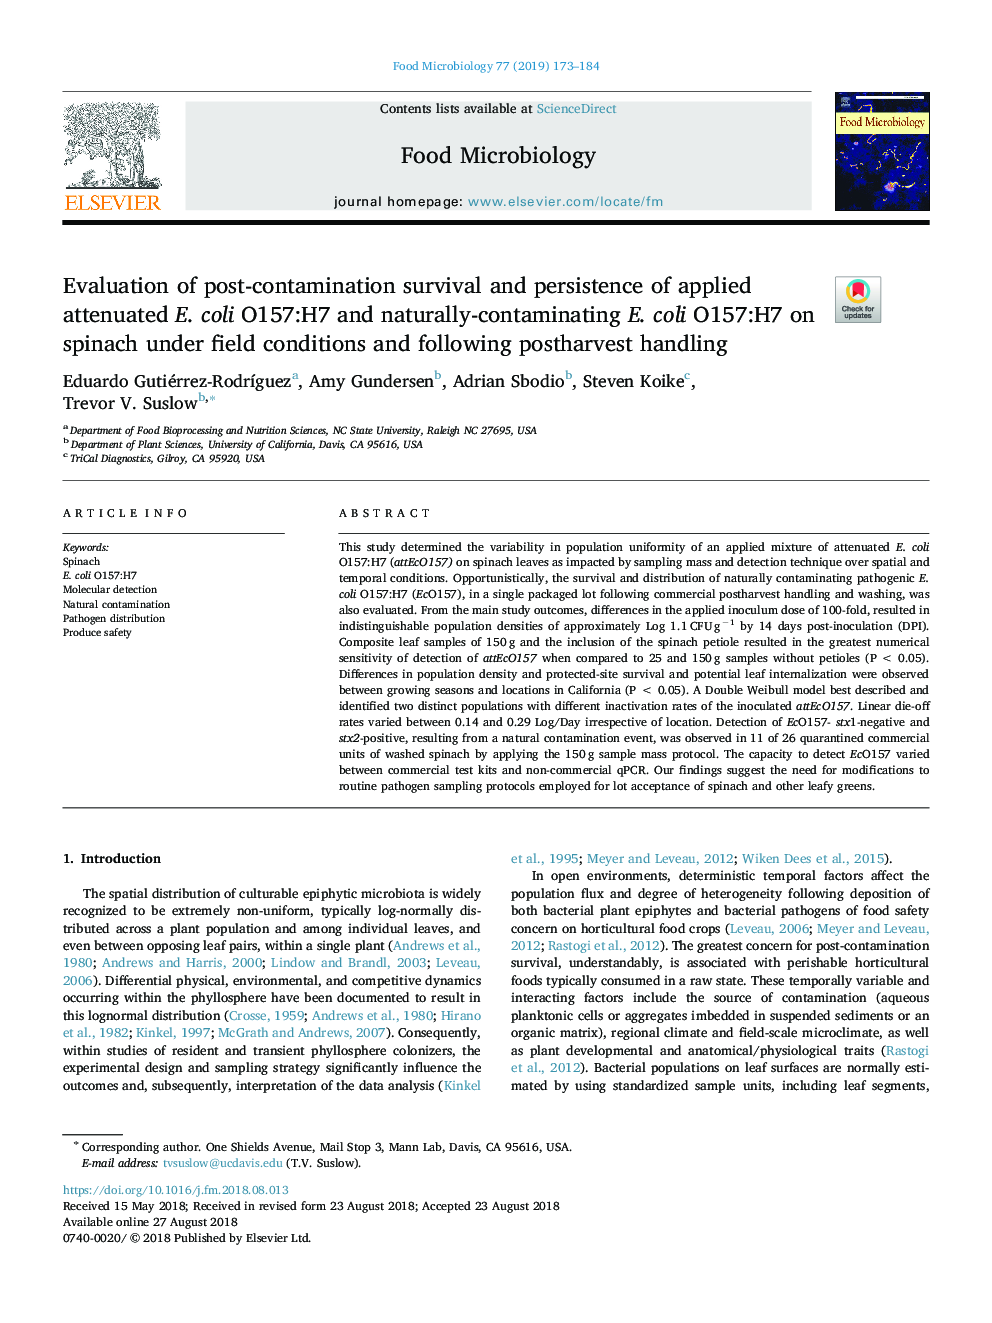 Evaluation of post-contamination survival and persistence of applied attenuated E. coli O157:H7 and naturally-contaminating E. coli O157:H7 on spinach under field conditions and following postharvest handling